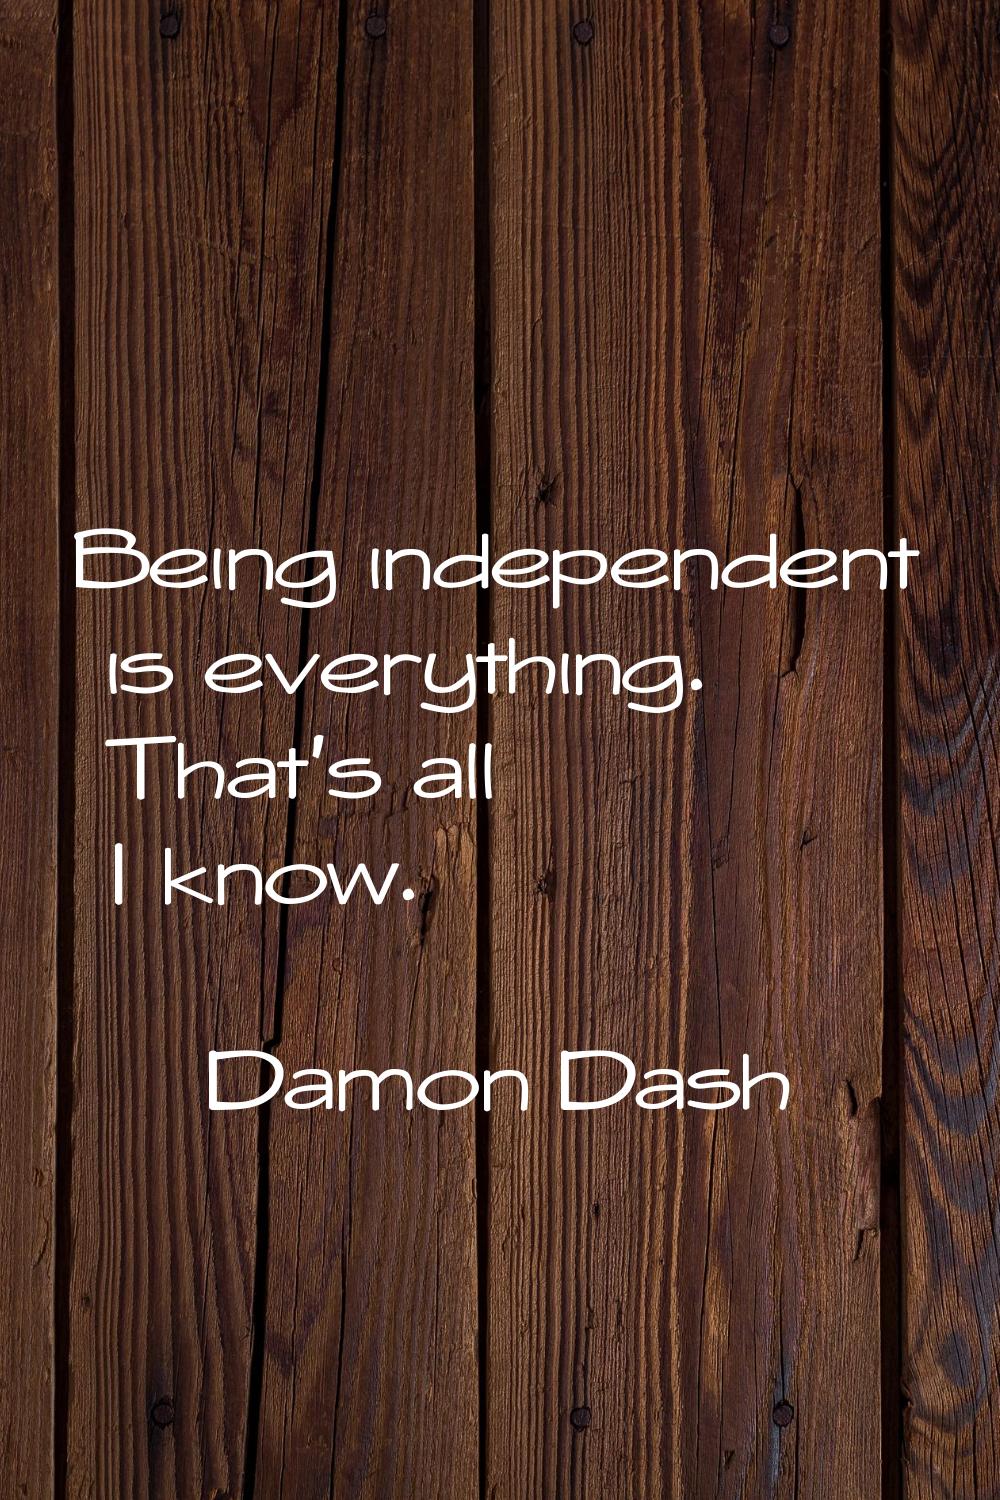 Being independent is everything. That's all I know.